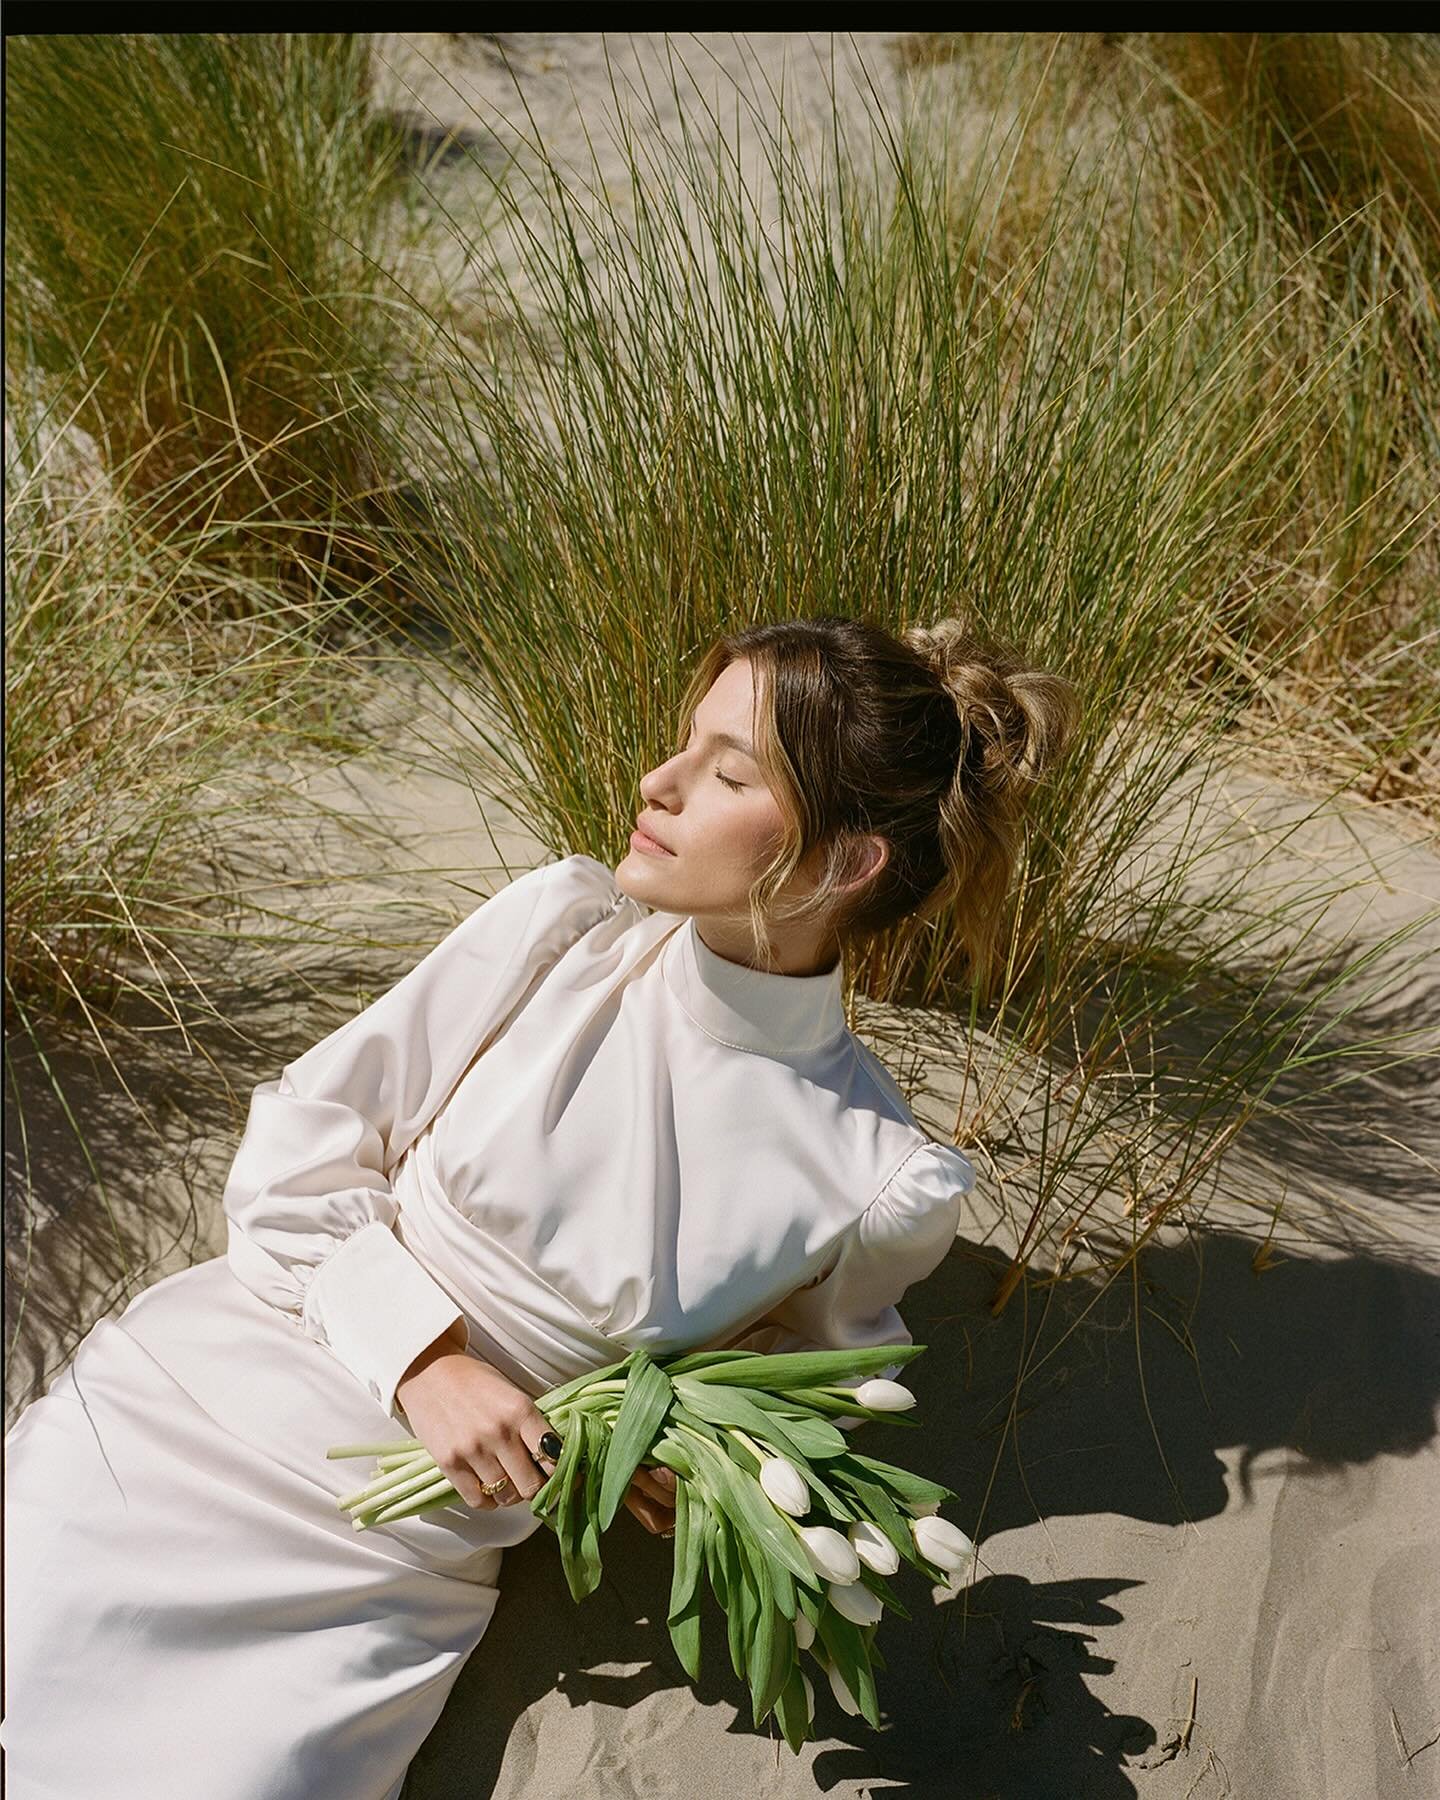 subtle moments in the dune grass with @kaceemoses dancing around in the beauty of central coast. 

captured on Kodak 120 film // shot on  #mamiya7 #120film #120 

developed and scanned: @negativelab